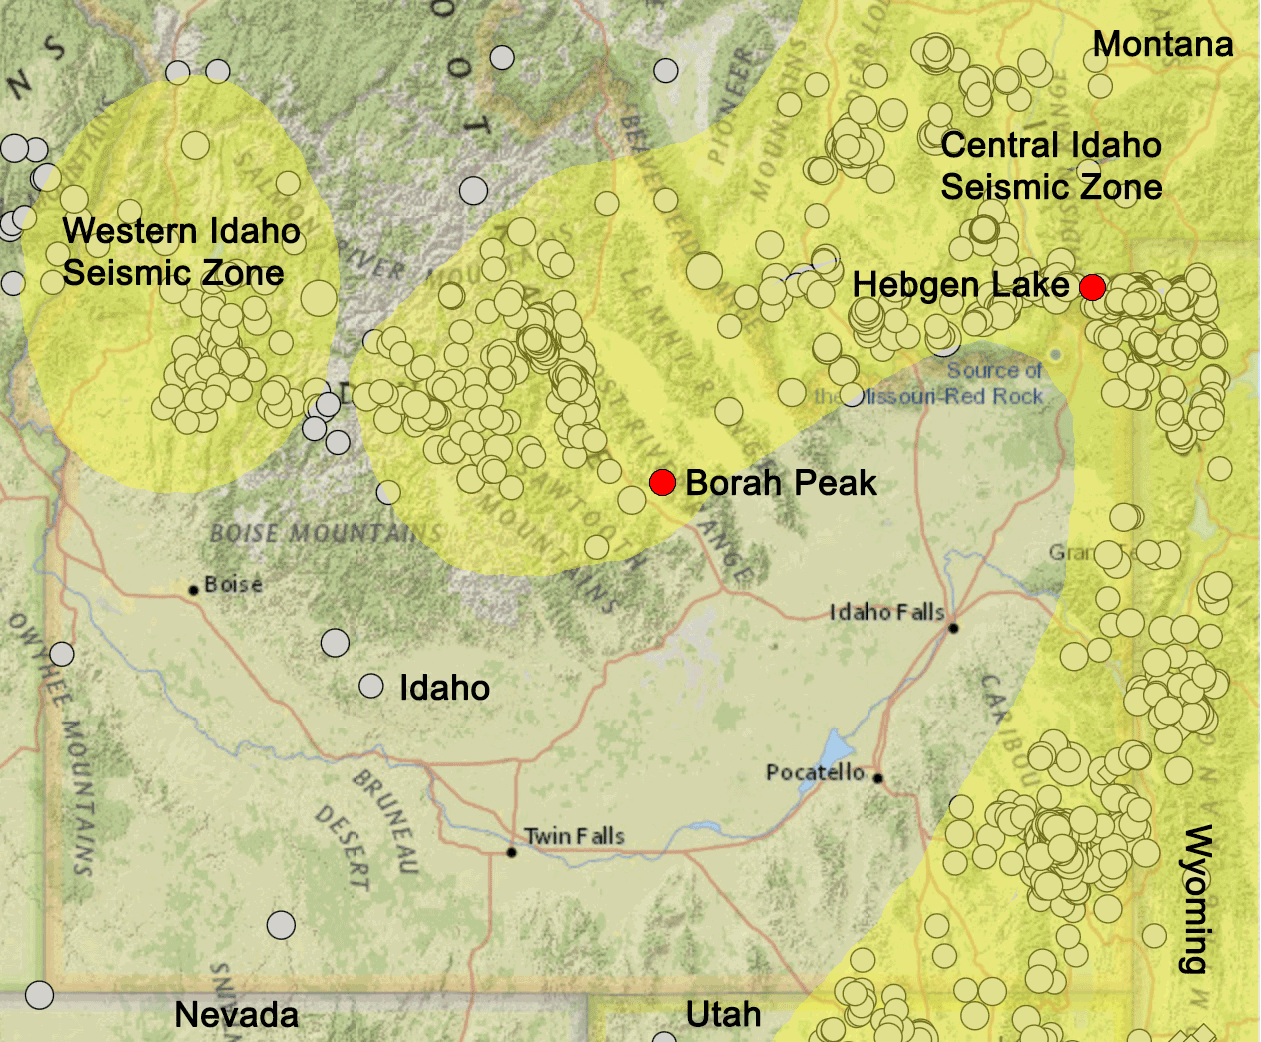 Map of southern Idaho showing the positions of the Western Idaho Seismic Zone, the Central Idaho Seismic Zone, Borah Peak, Hebgen Lake, and locations of M2.5+ earthquake epicenters between 2000 and 2020.